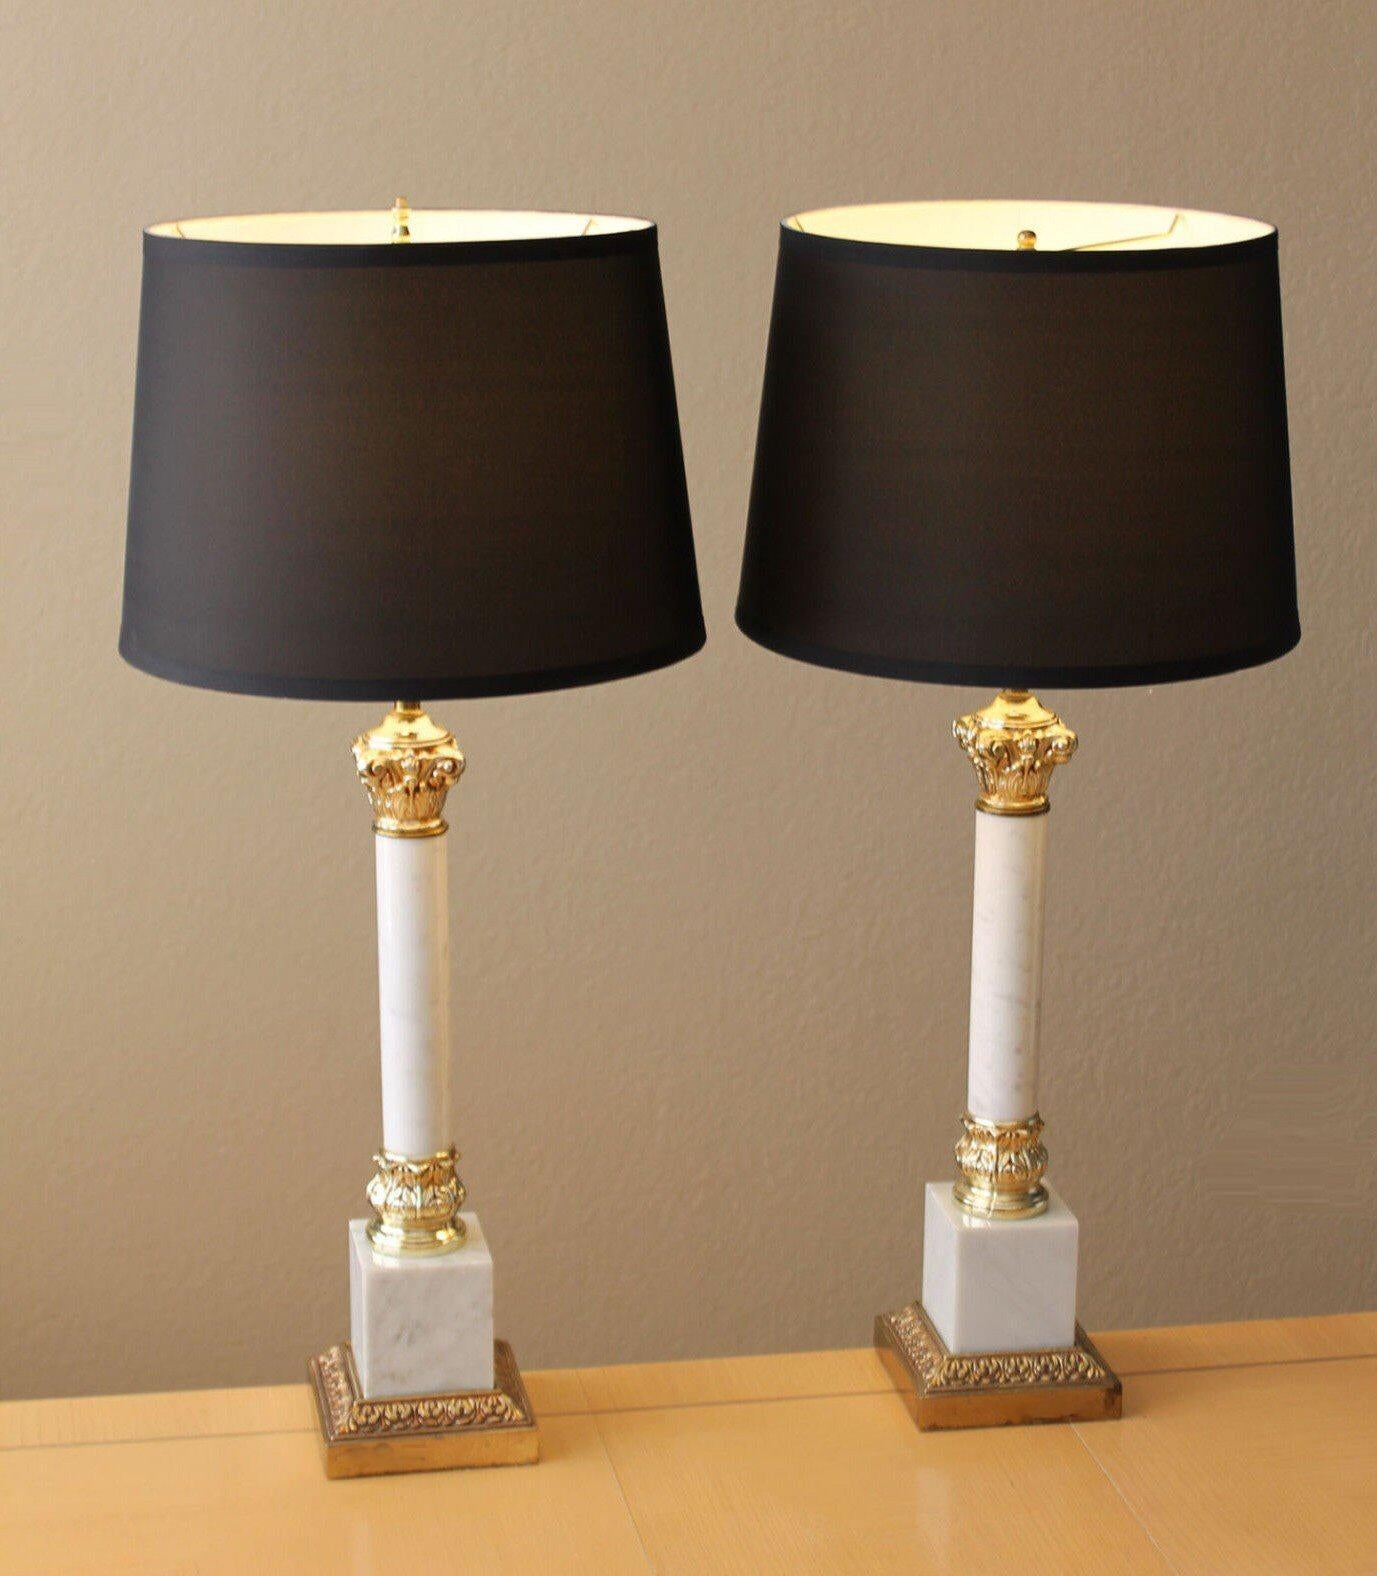 
EXQUISITE !

PAIR FREDERICK COOPER
COLUMN MARBLE  LAMPS
LOUIS XVI STYLE

(DIMENSIONS: APPROX. 31